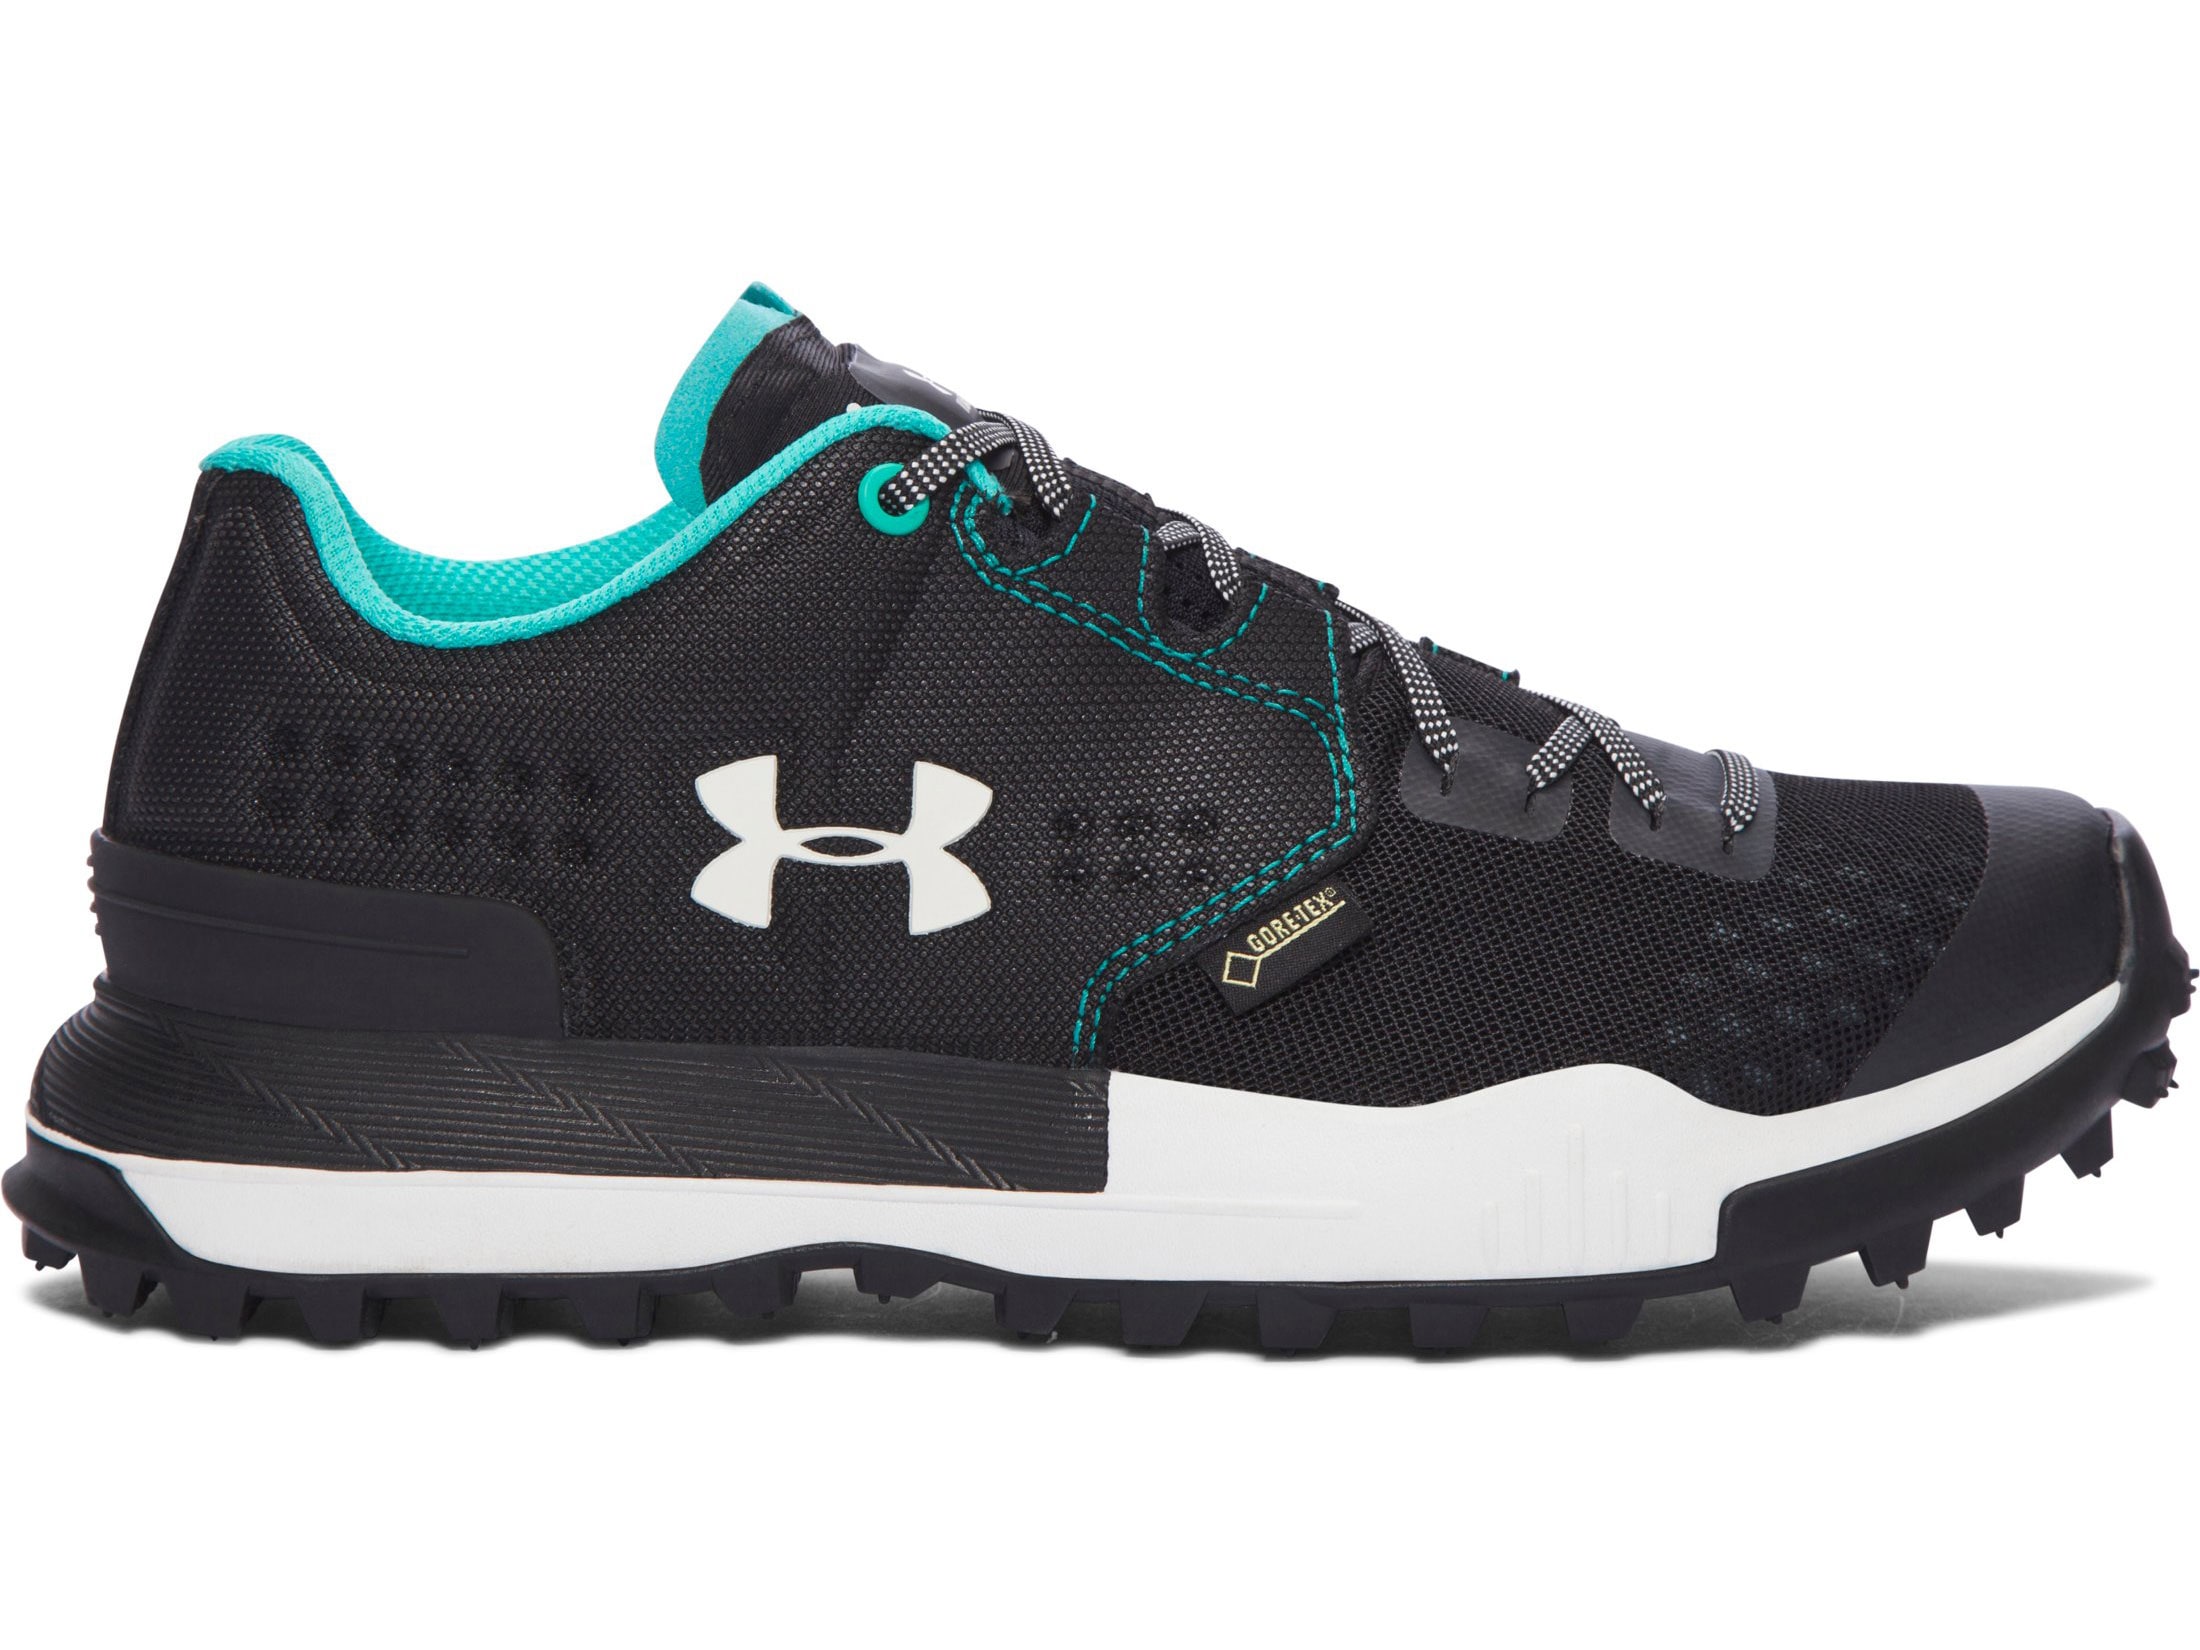 Under Armour UA Newell Ridge Low GTX 4 Hiking Shoes Synthetic Black